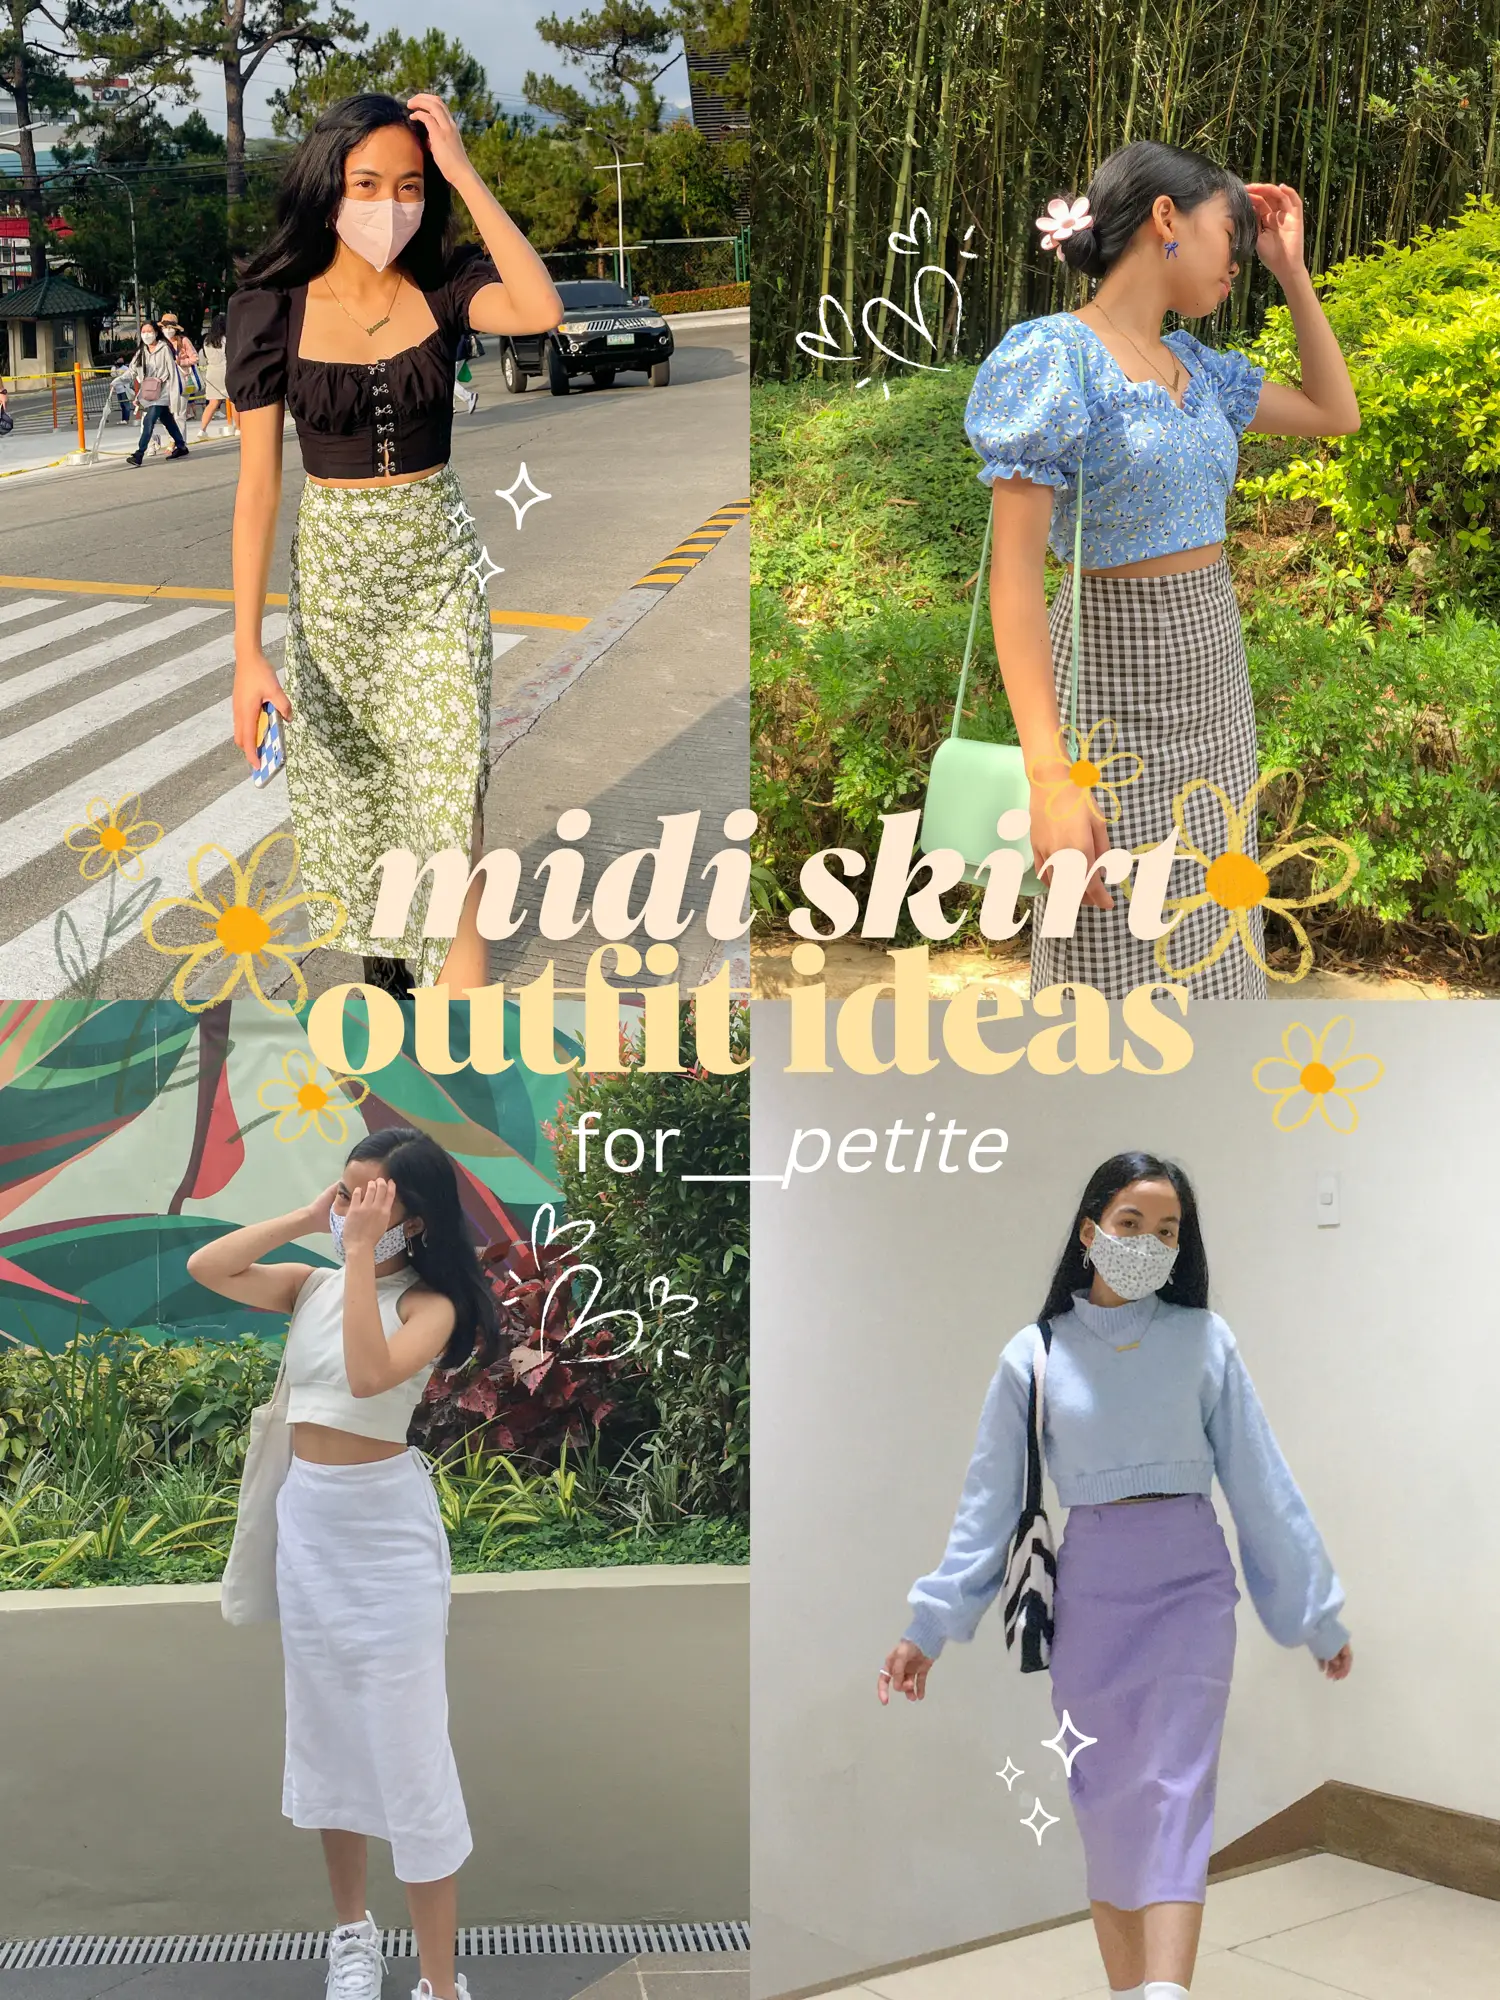 Check styling ideas for「EXTRA STRETCH HIGH RISE CROPPED LEGGINGS PANTS、PRINTED  SLIT MIDI SKIRT」